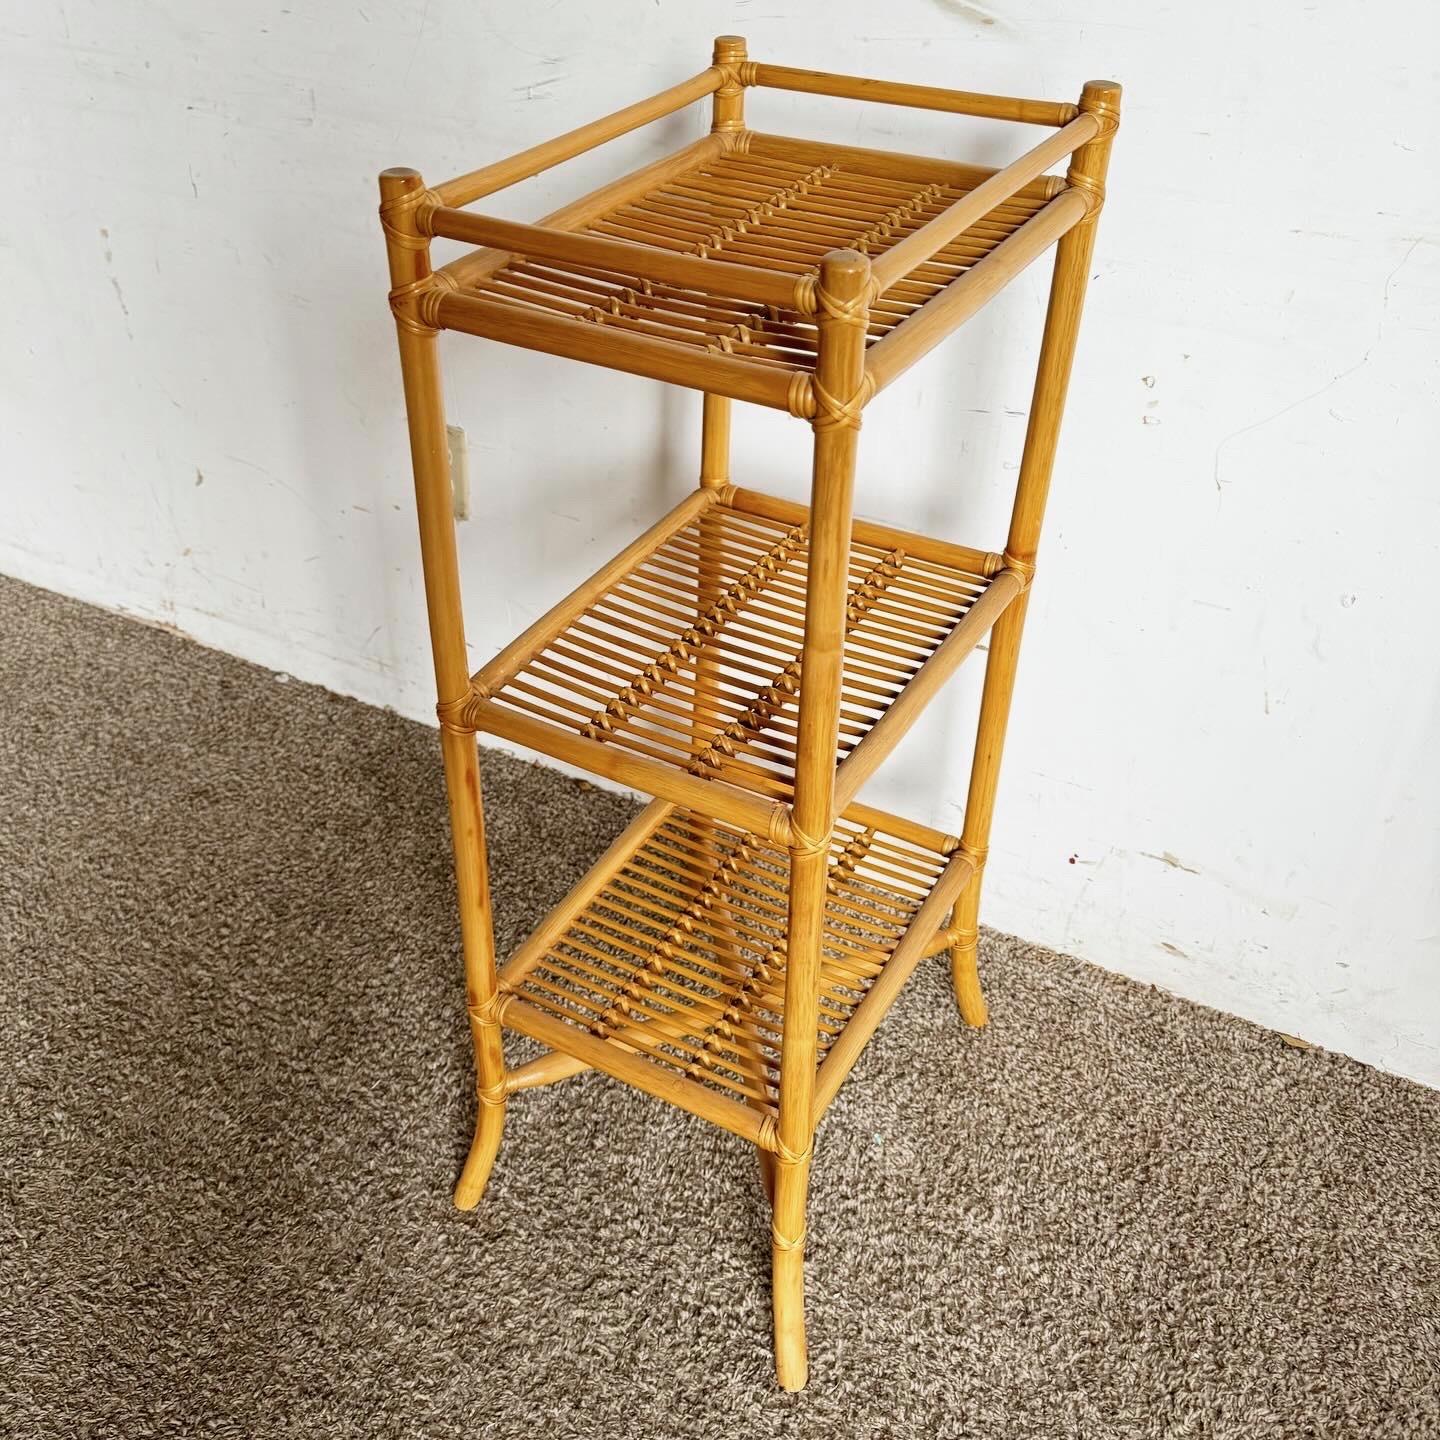 Boho Chic Bamboo Rattan Shelf/Etagere/Stand In Good Condition For Sale In Delray Beach, FL